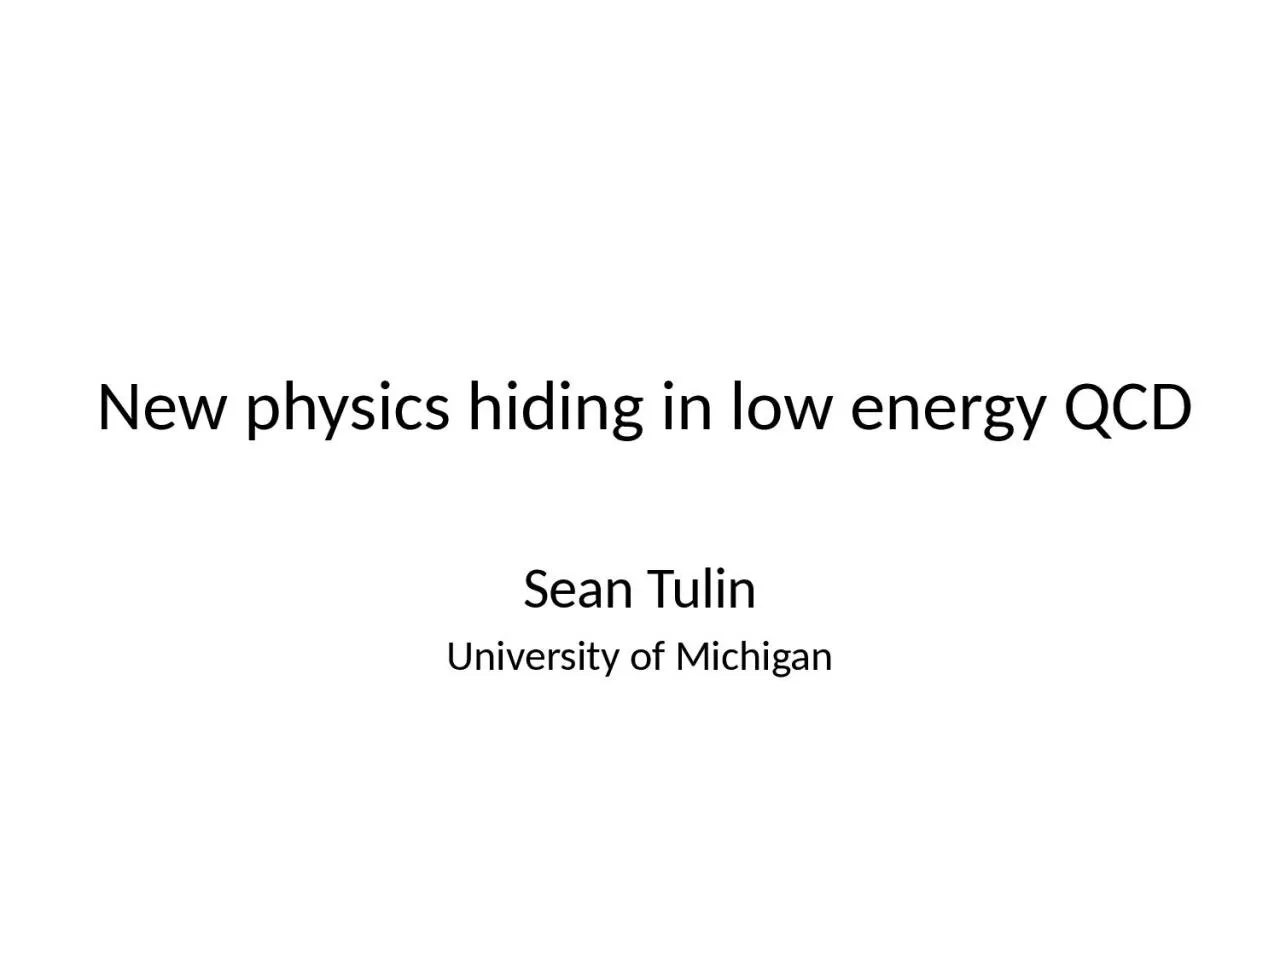 New physics hiding in low energy QCD